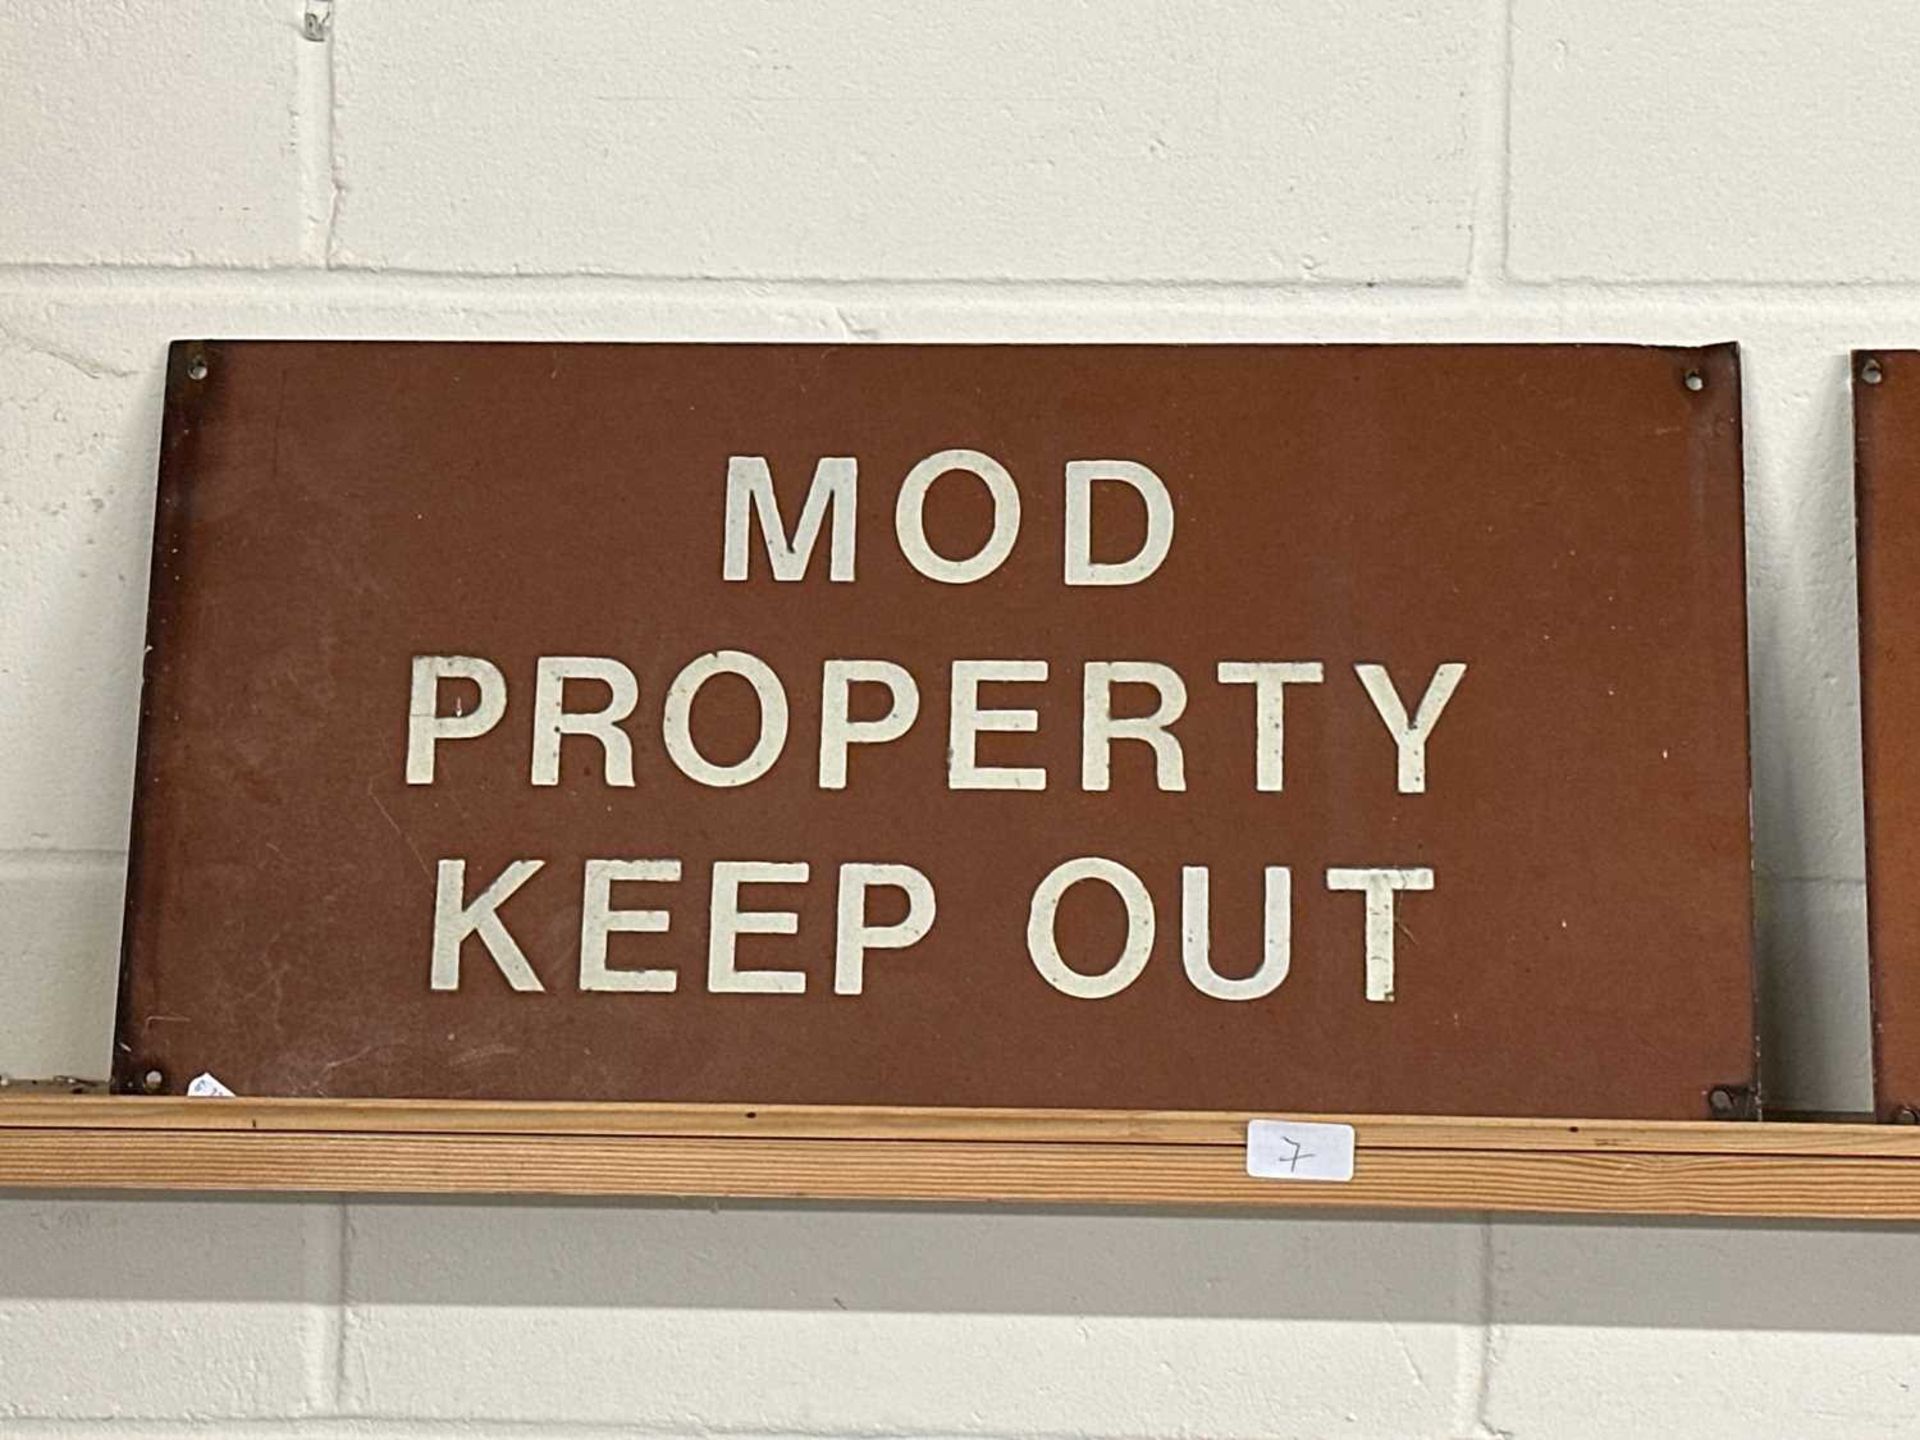 Metal ex Ministry of Defence sign "MOD Property - Keep Out"